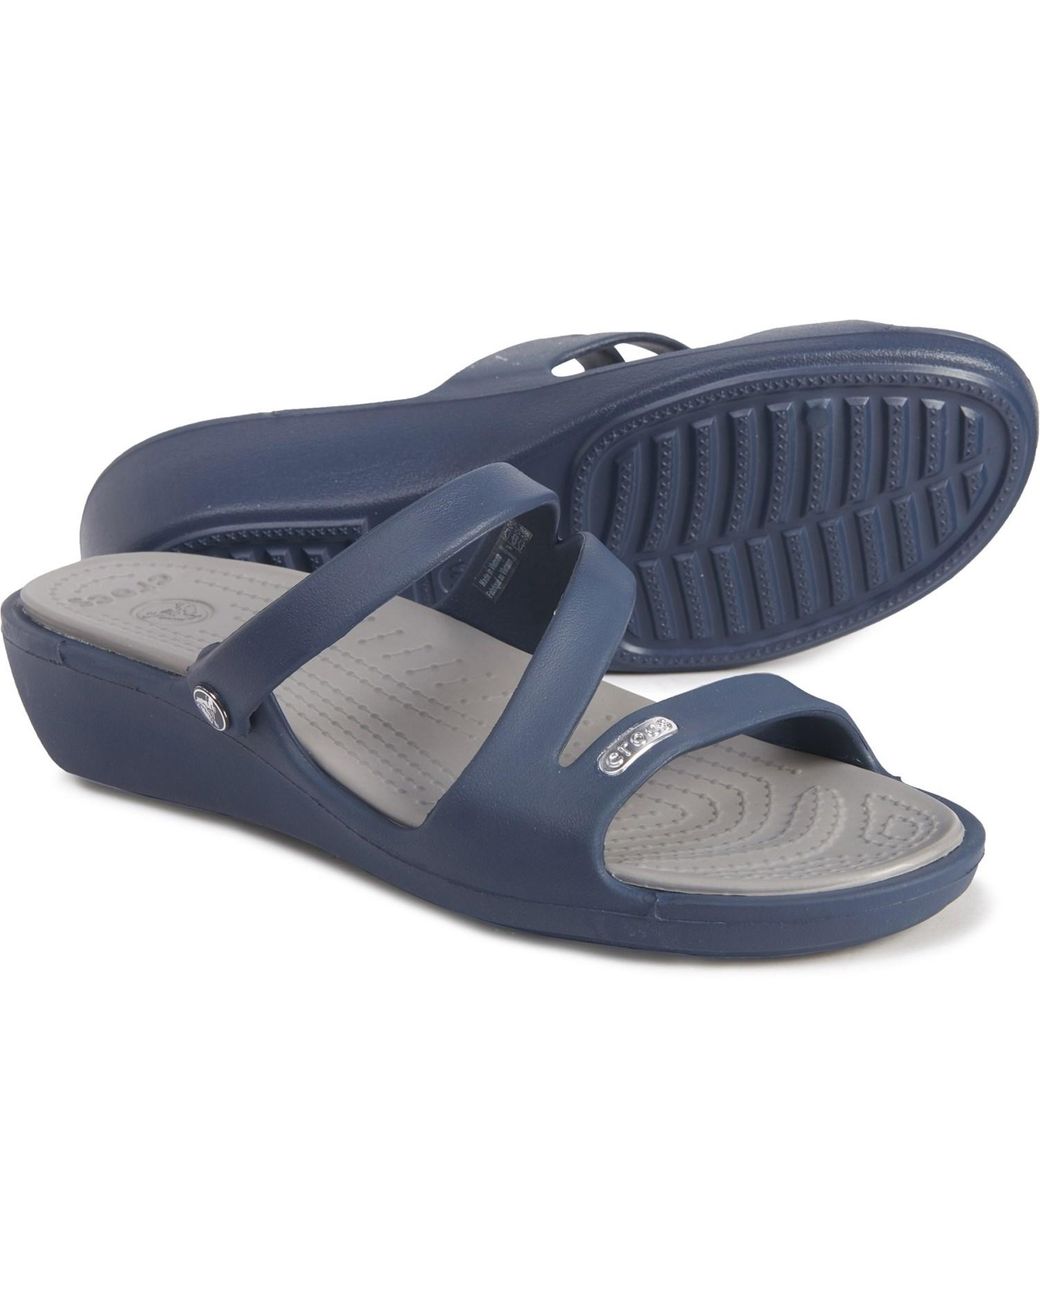 Crocs™ Patricia Wedge Sandals in Navy/Smoke (Blue) | Lyst